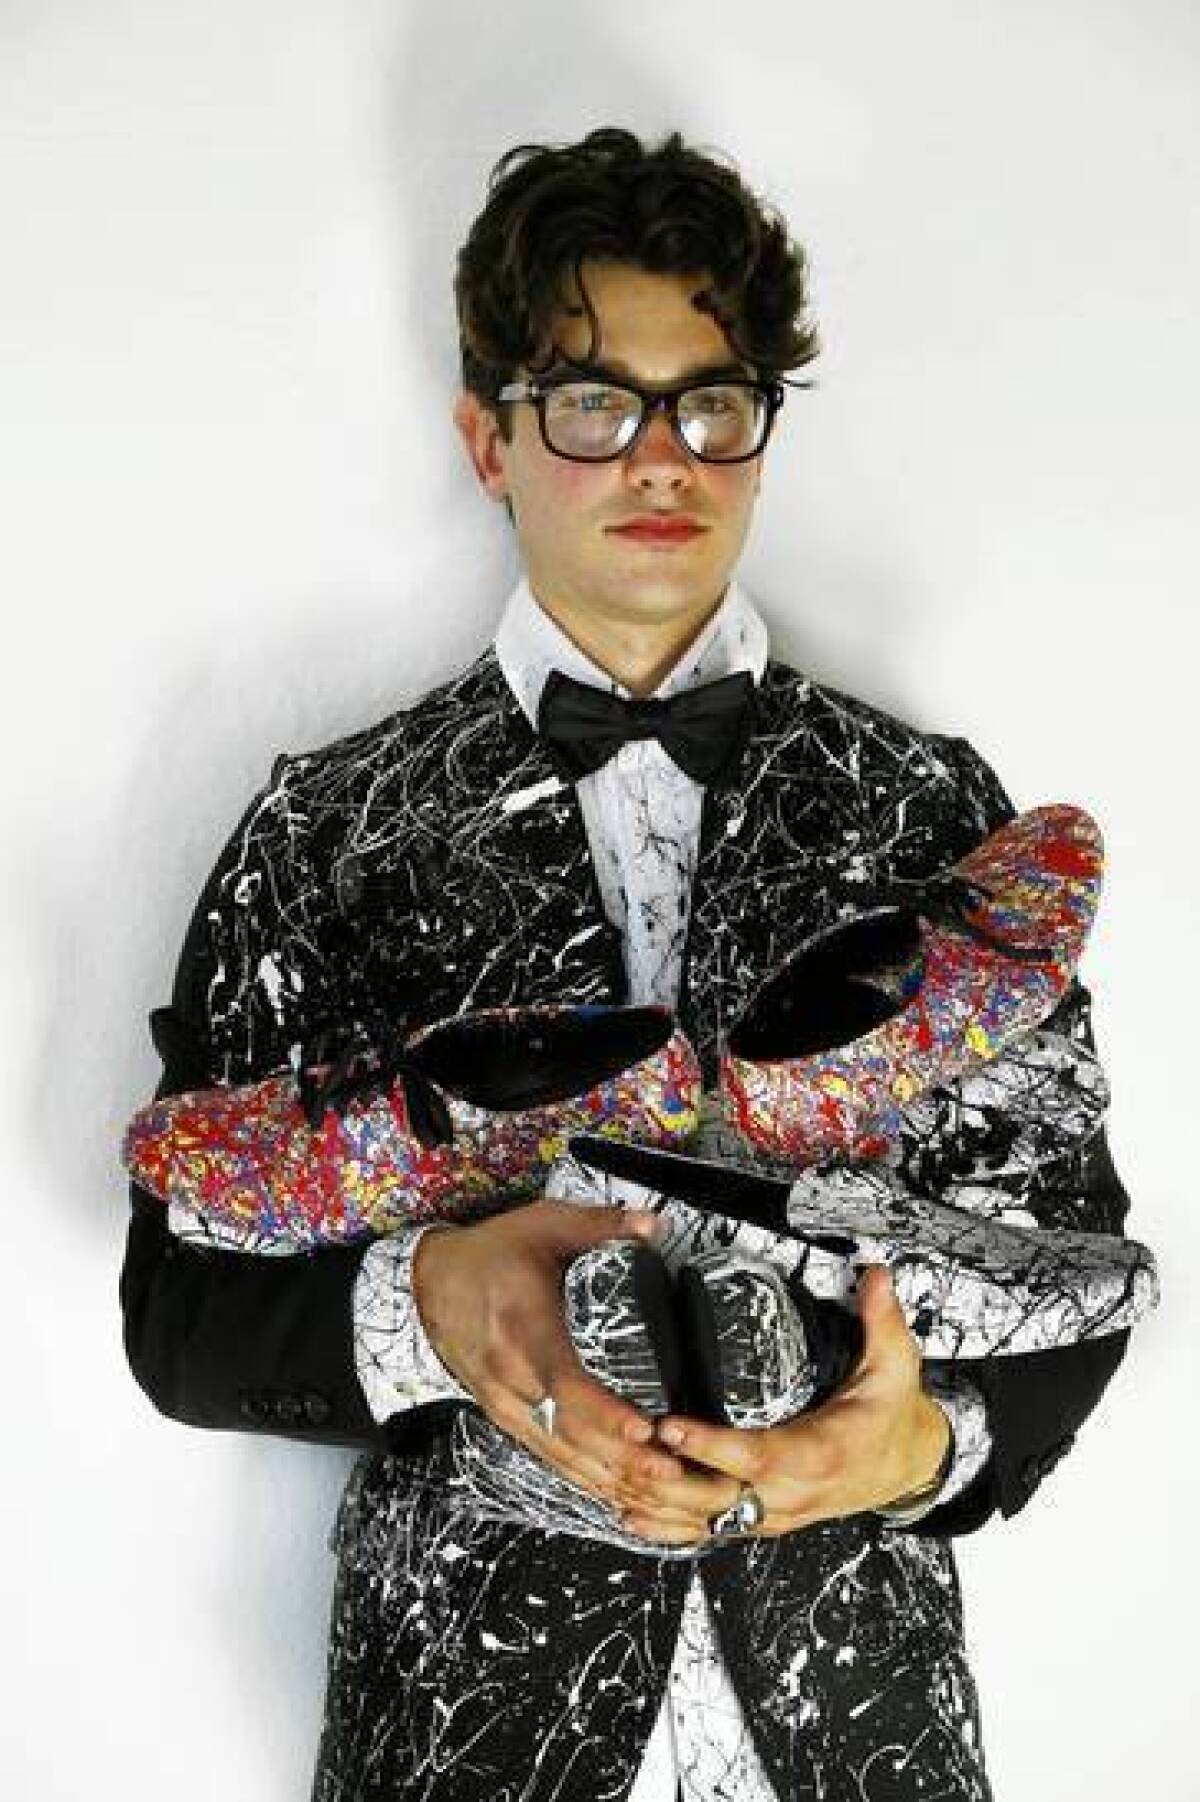 Cameron Helm is a walking billboard for his distinctive style.